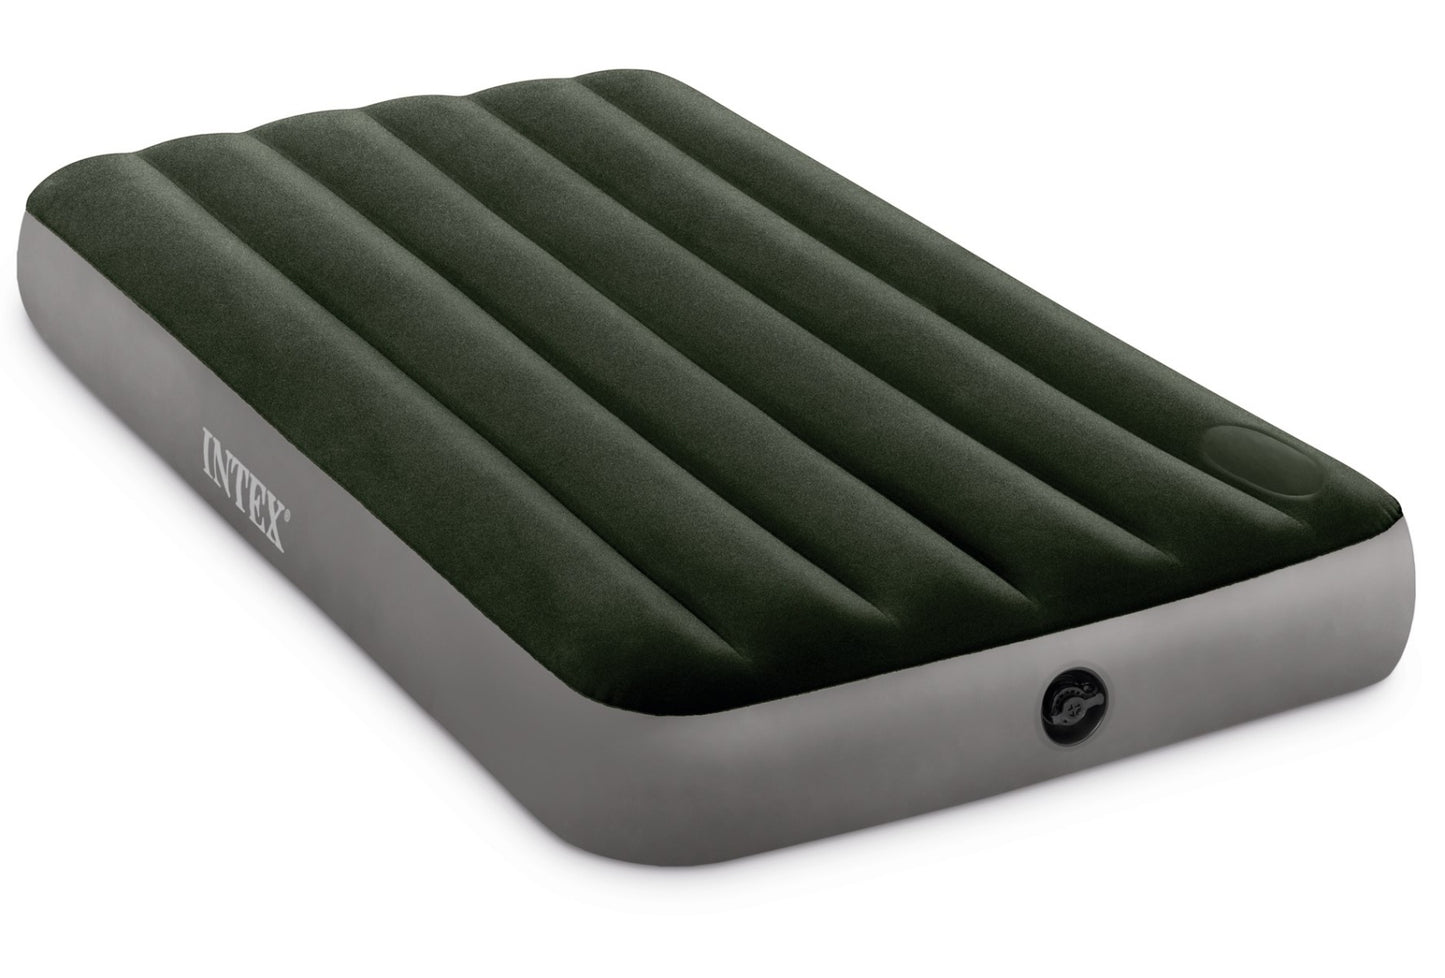 Intex - Mohy Airbed - single